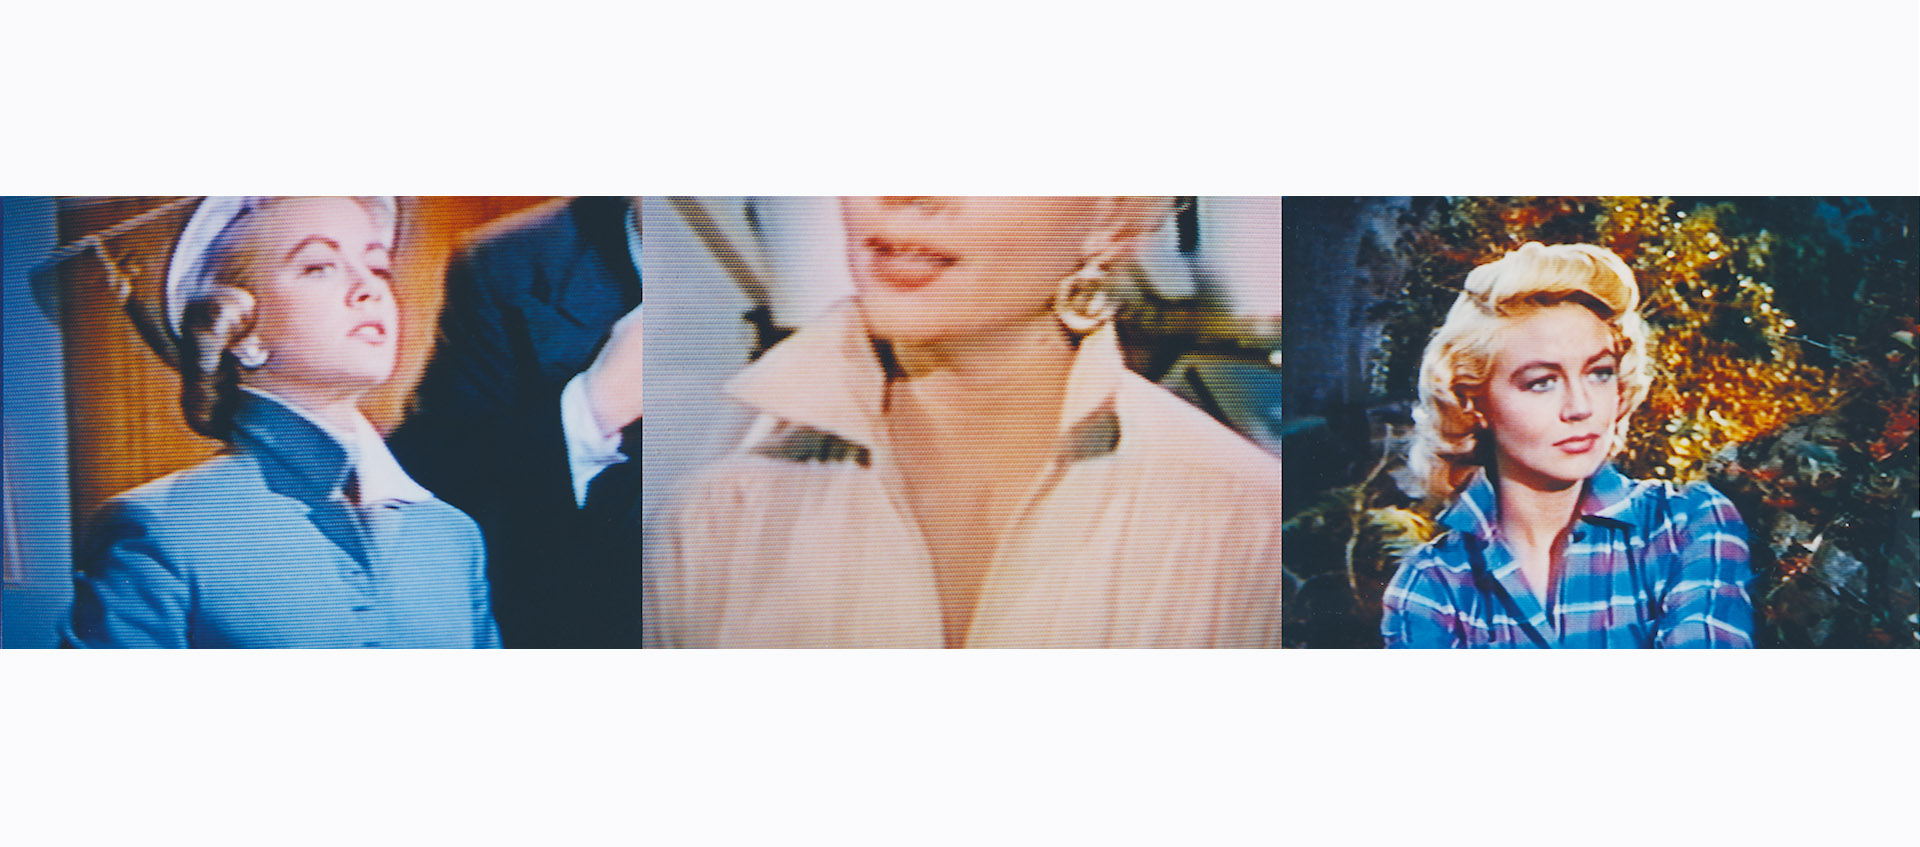 Detail from the photo collage Dorothy Malone's collar by John Waters